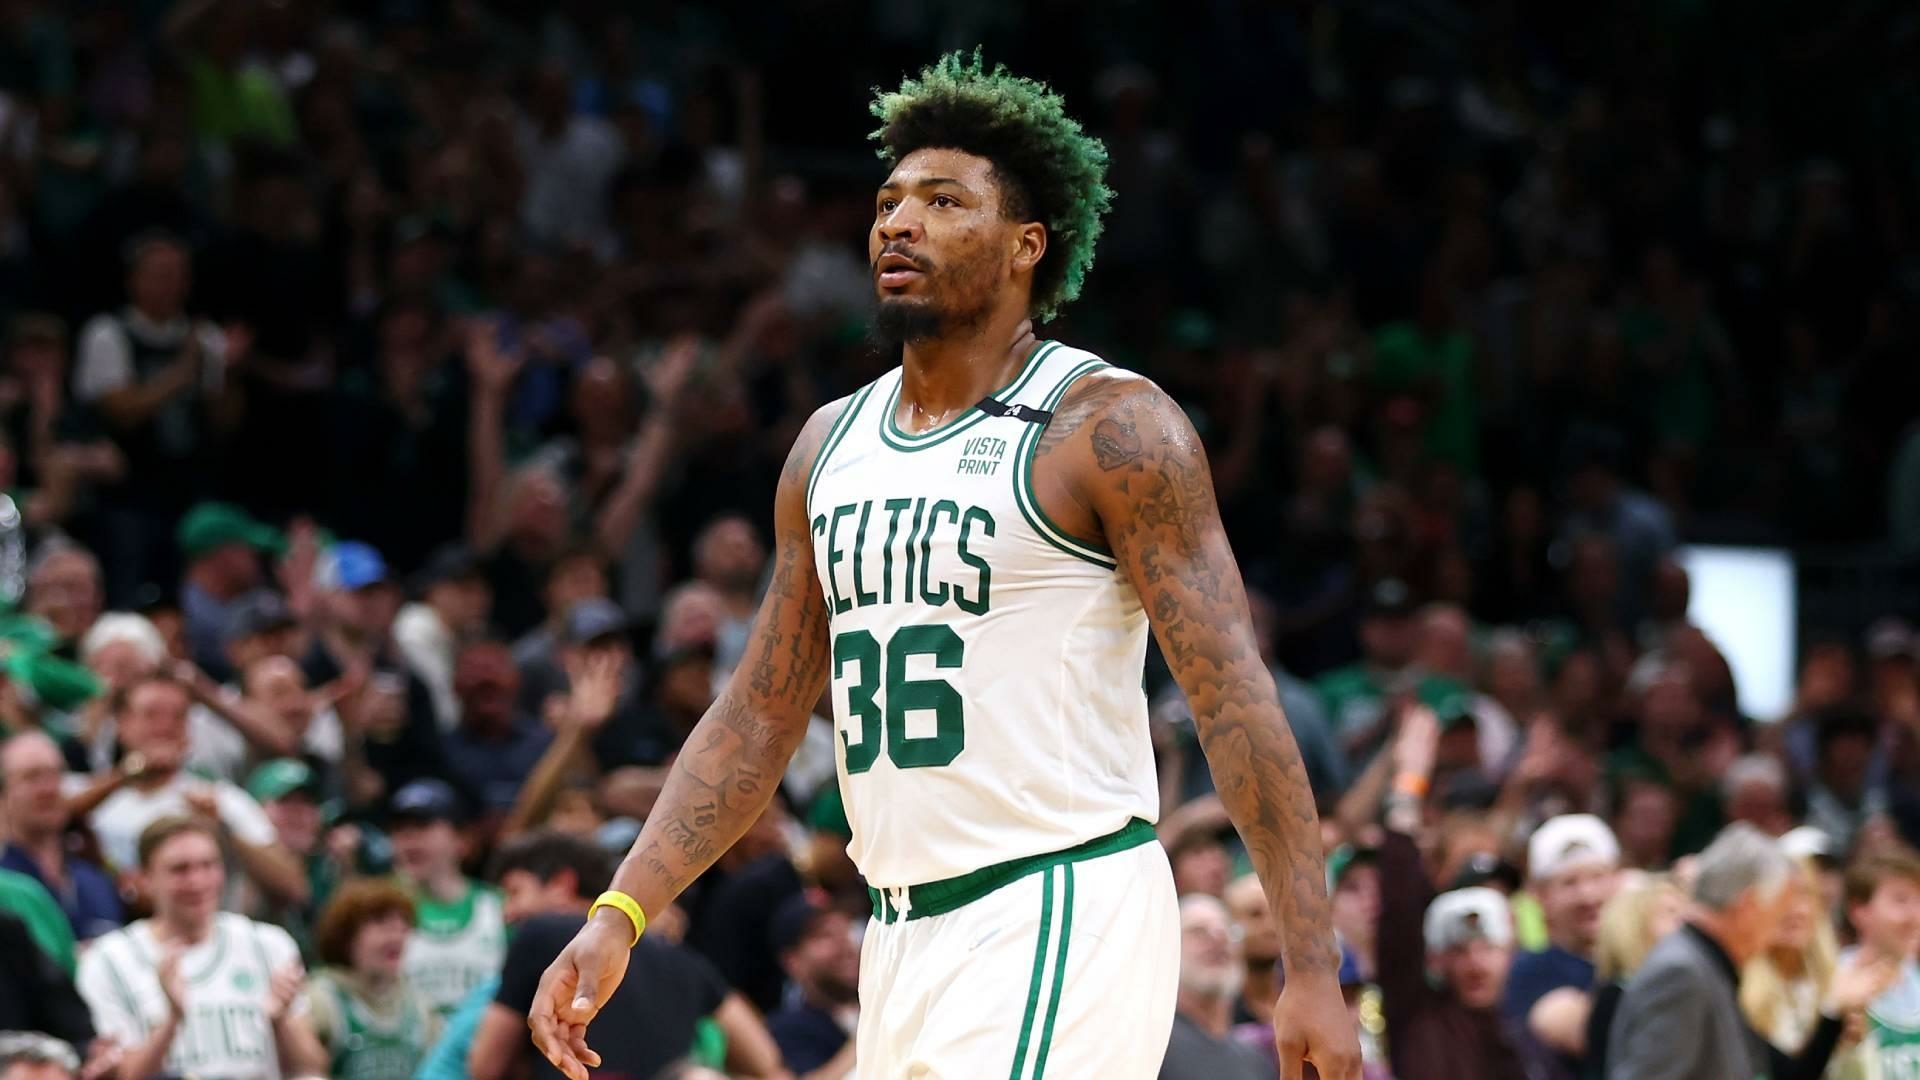 5. Marcus Smart's Blue Hair Causes Stir Among NBA Players - wide 10